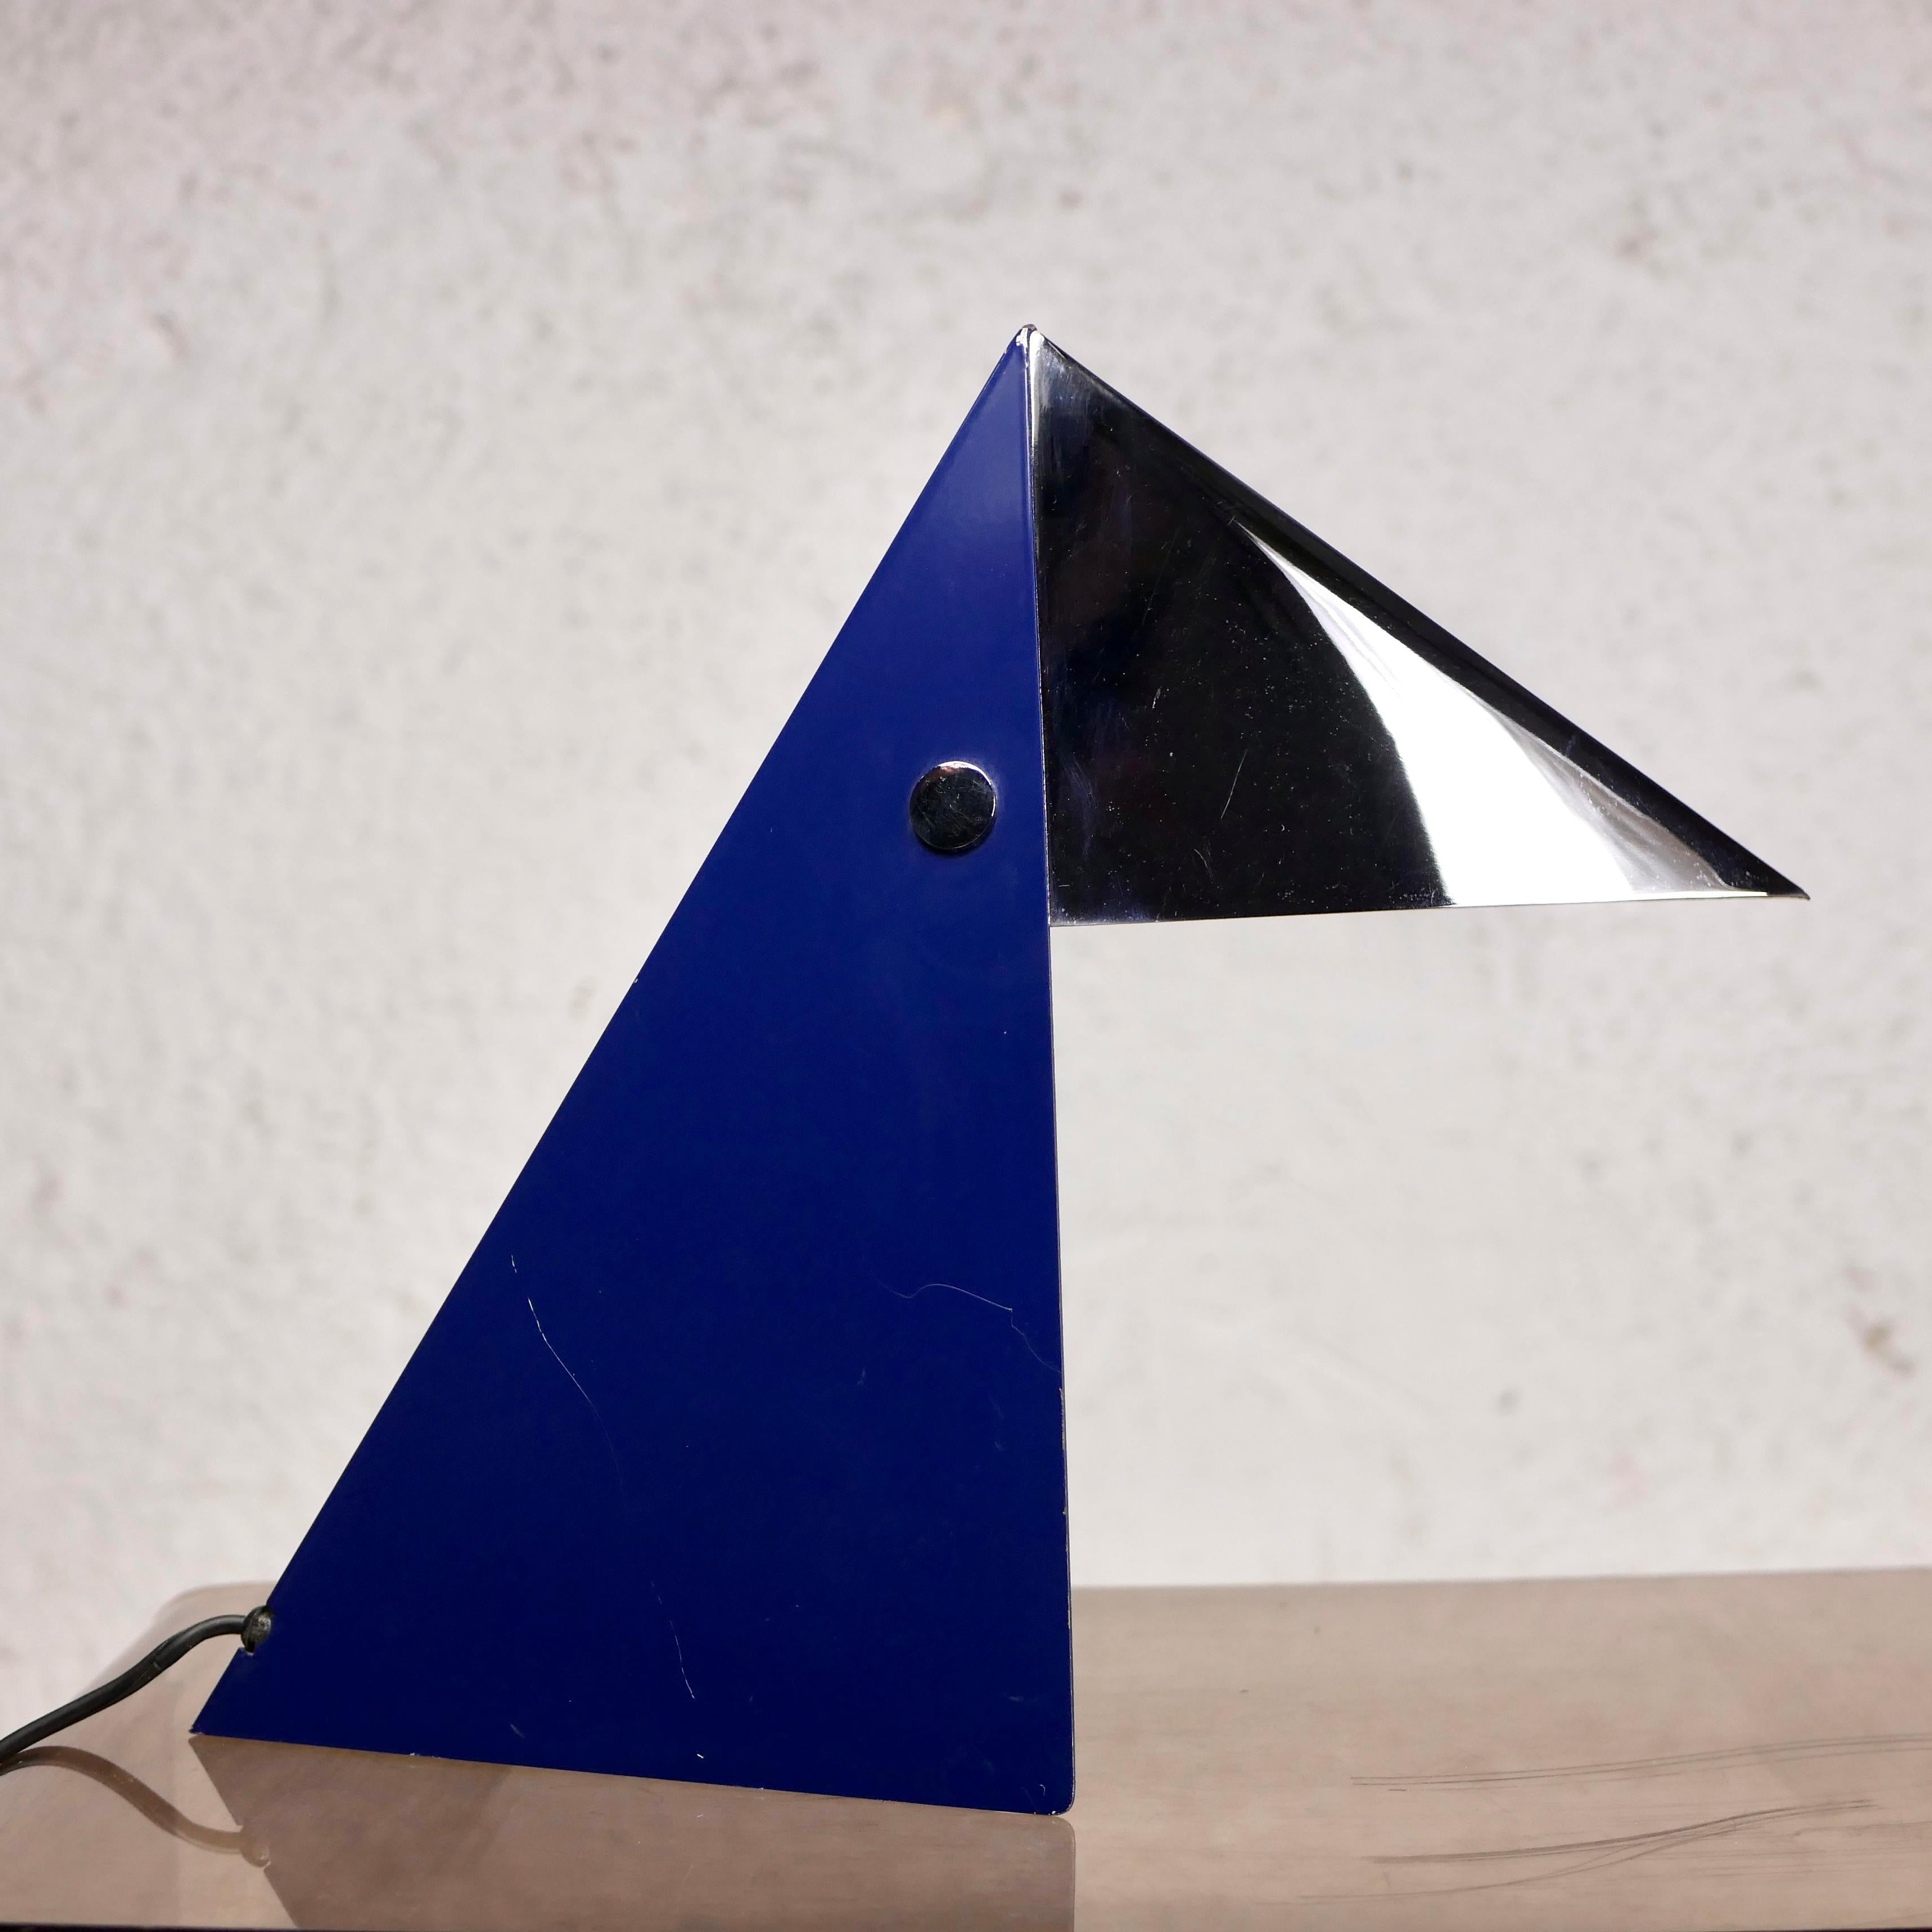 Nice and rare postmodernist table lamp by Fase, made in Spain in the 1970s, in blue lacquered metal and chromed metal.
Good condition, some light scratches (see photos).
A one-of-a-kind product.

